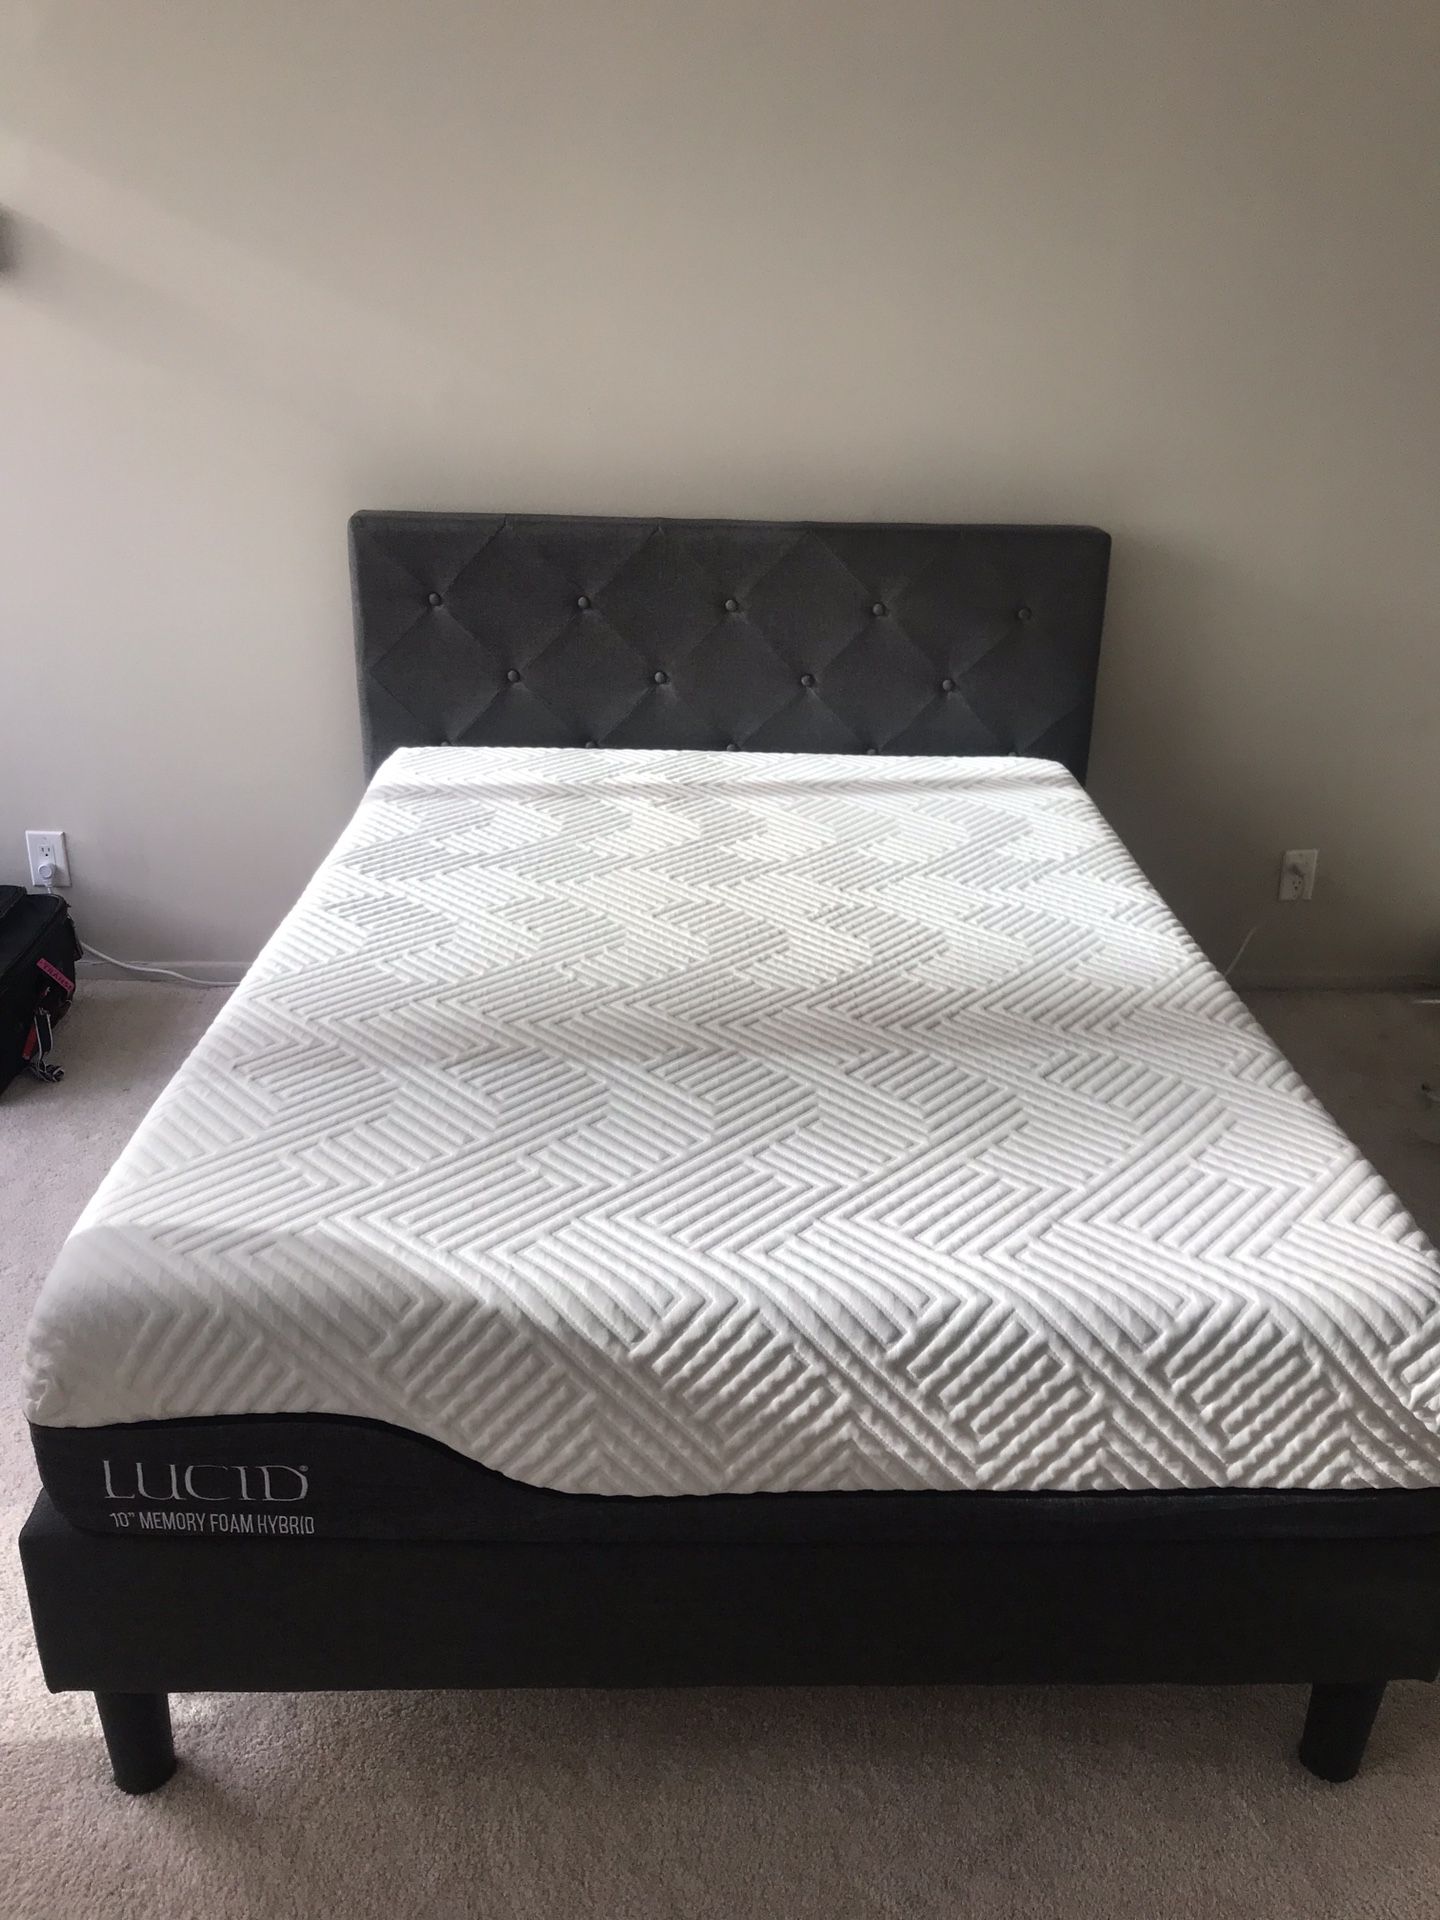 Queen-size mattress and bed frame